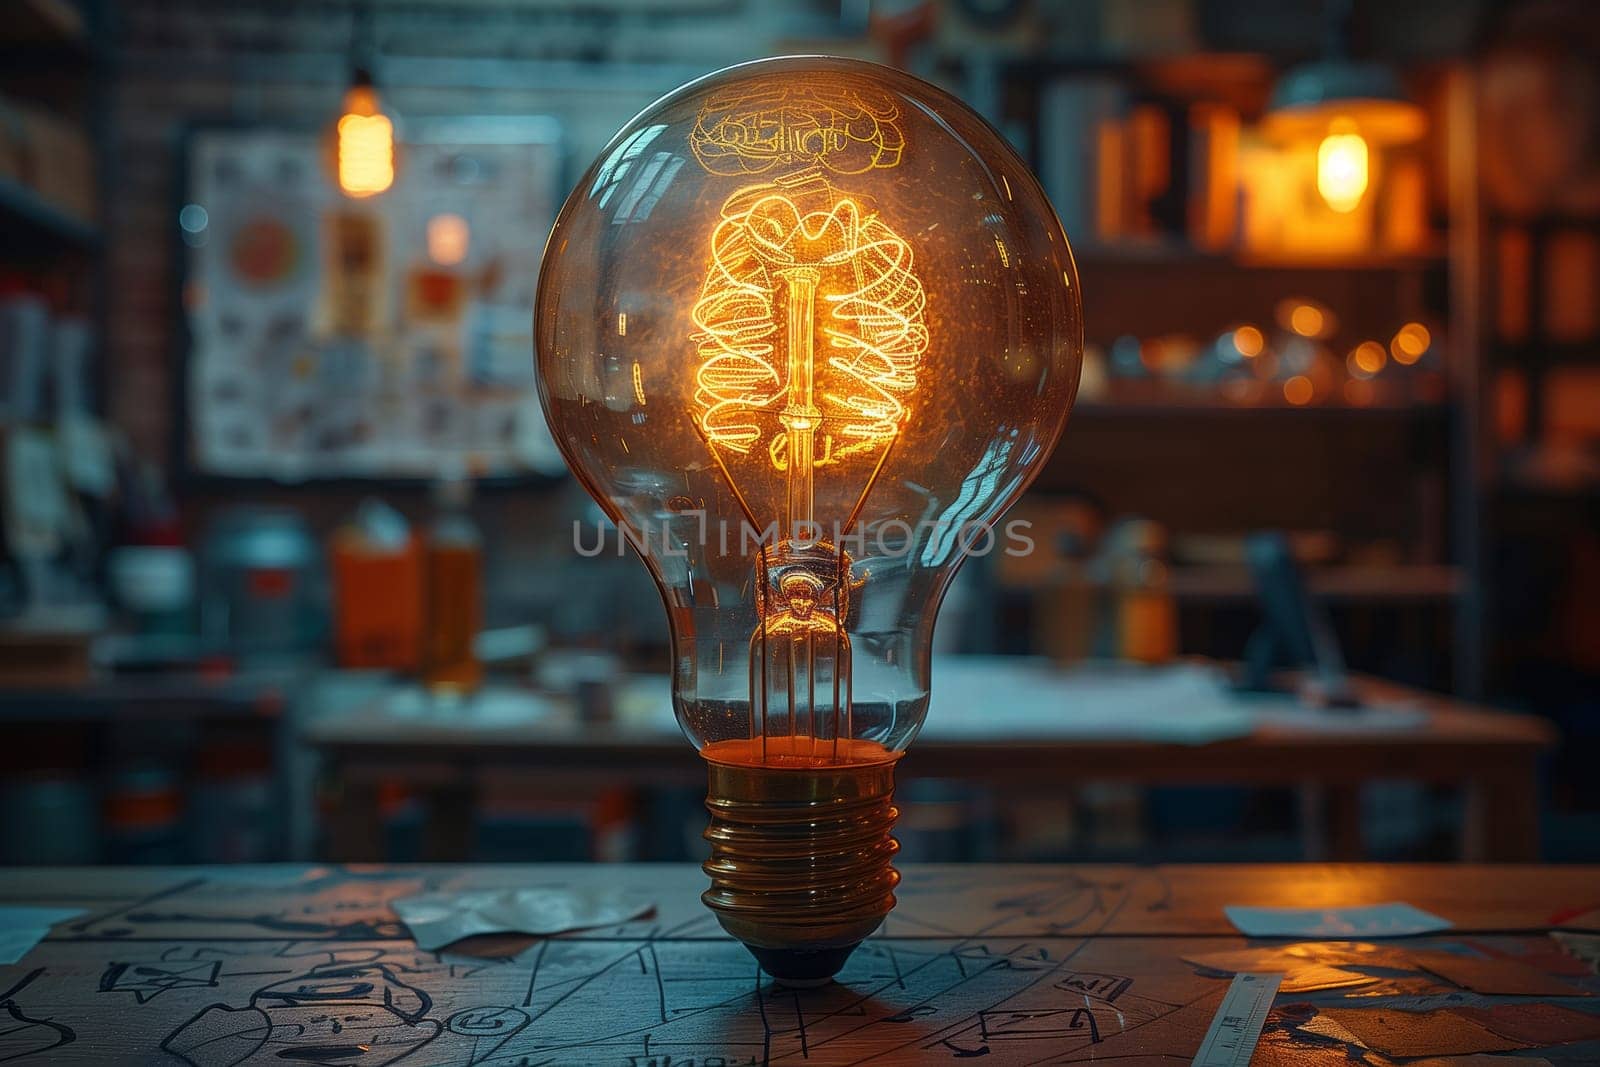 An amber drinkware lamp with a brain design sits on a wooden table, bringing a unique touch to the event. The stemware combines glass and city vibes, making it a standout piece of barware